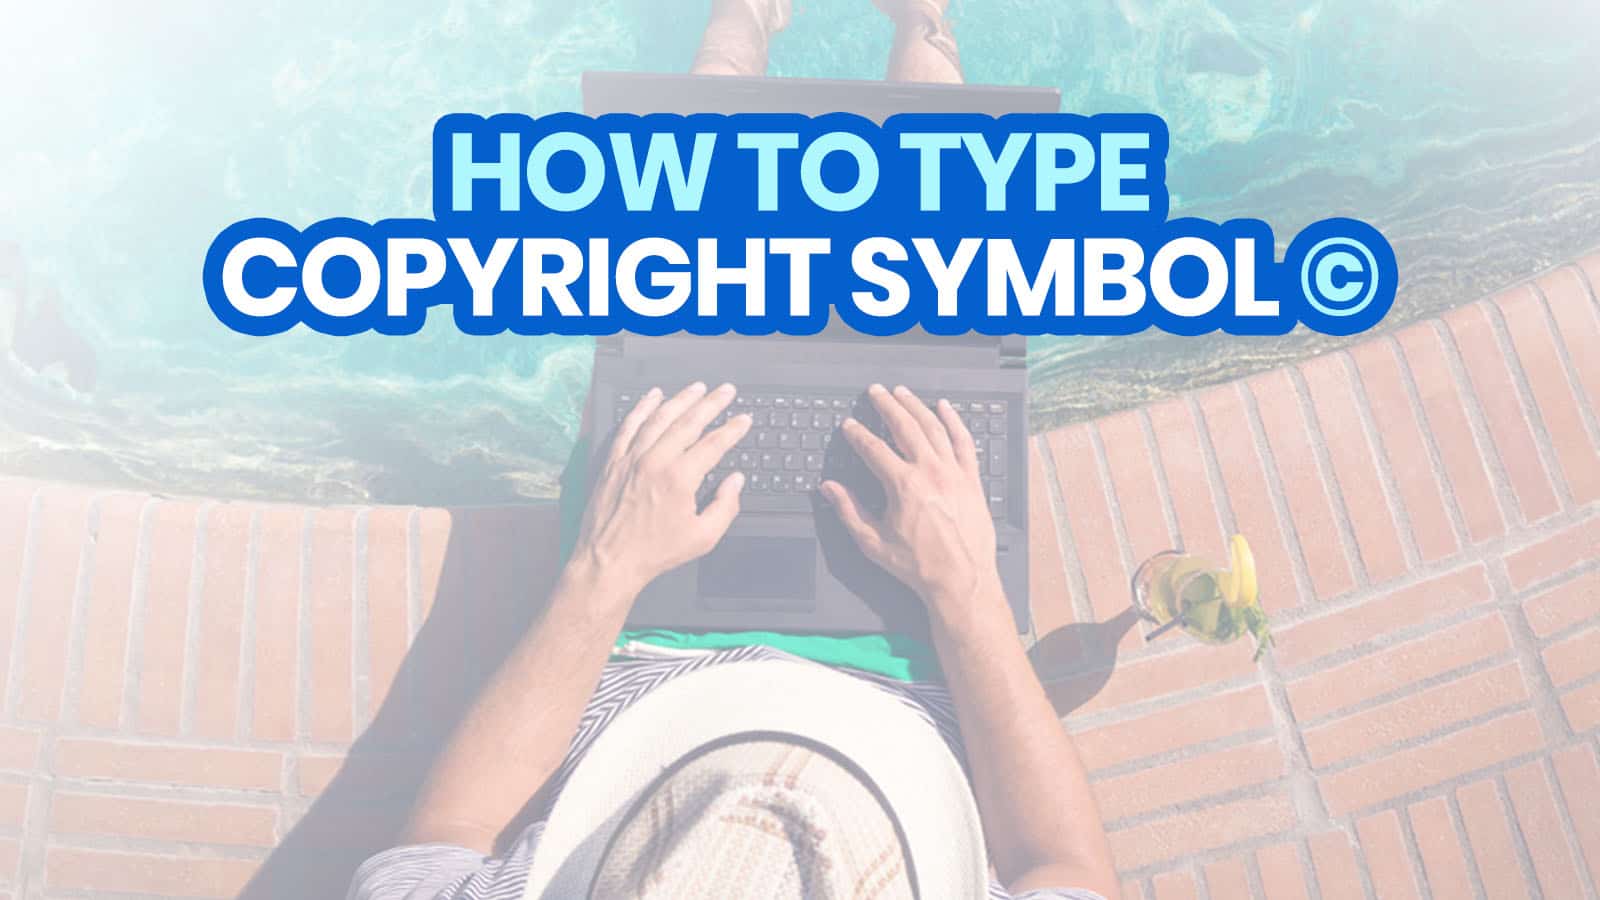 how to create copyright symbol on keyboard